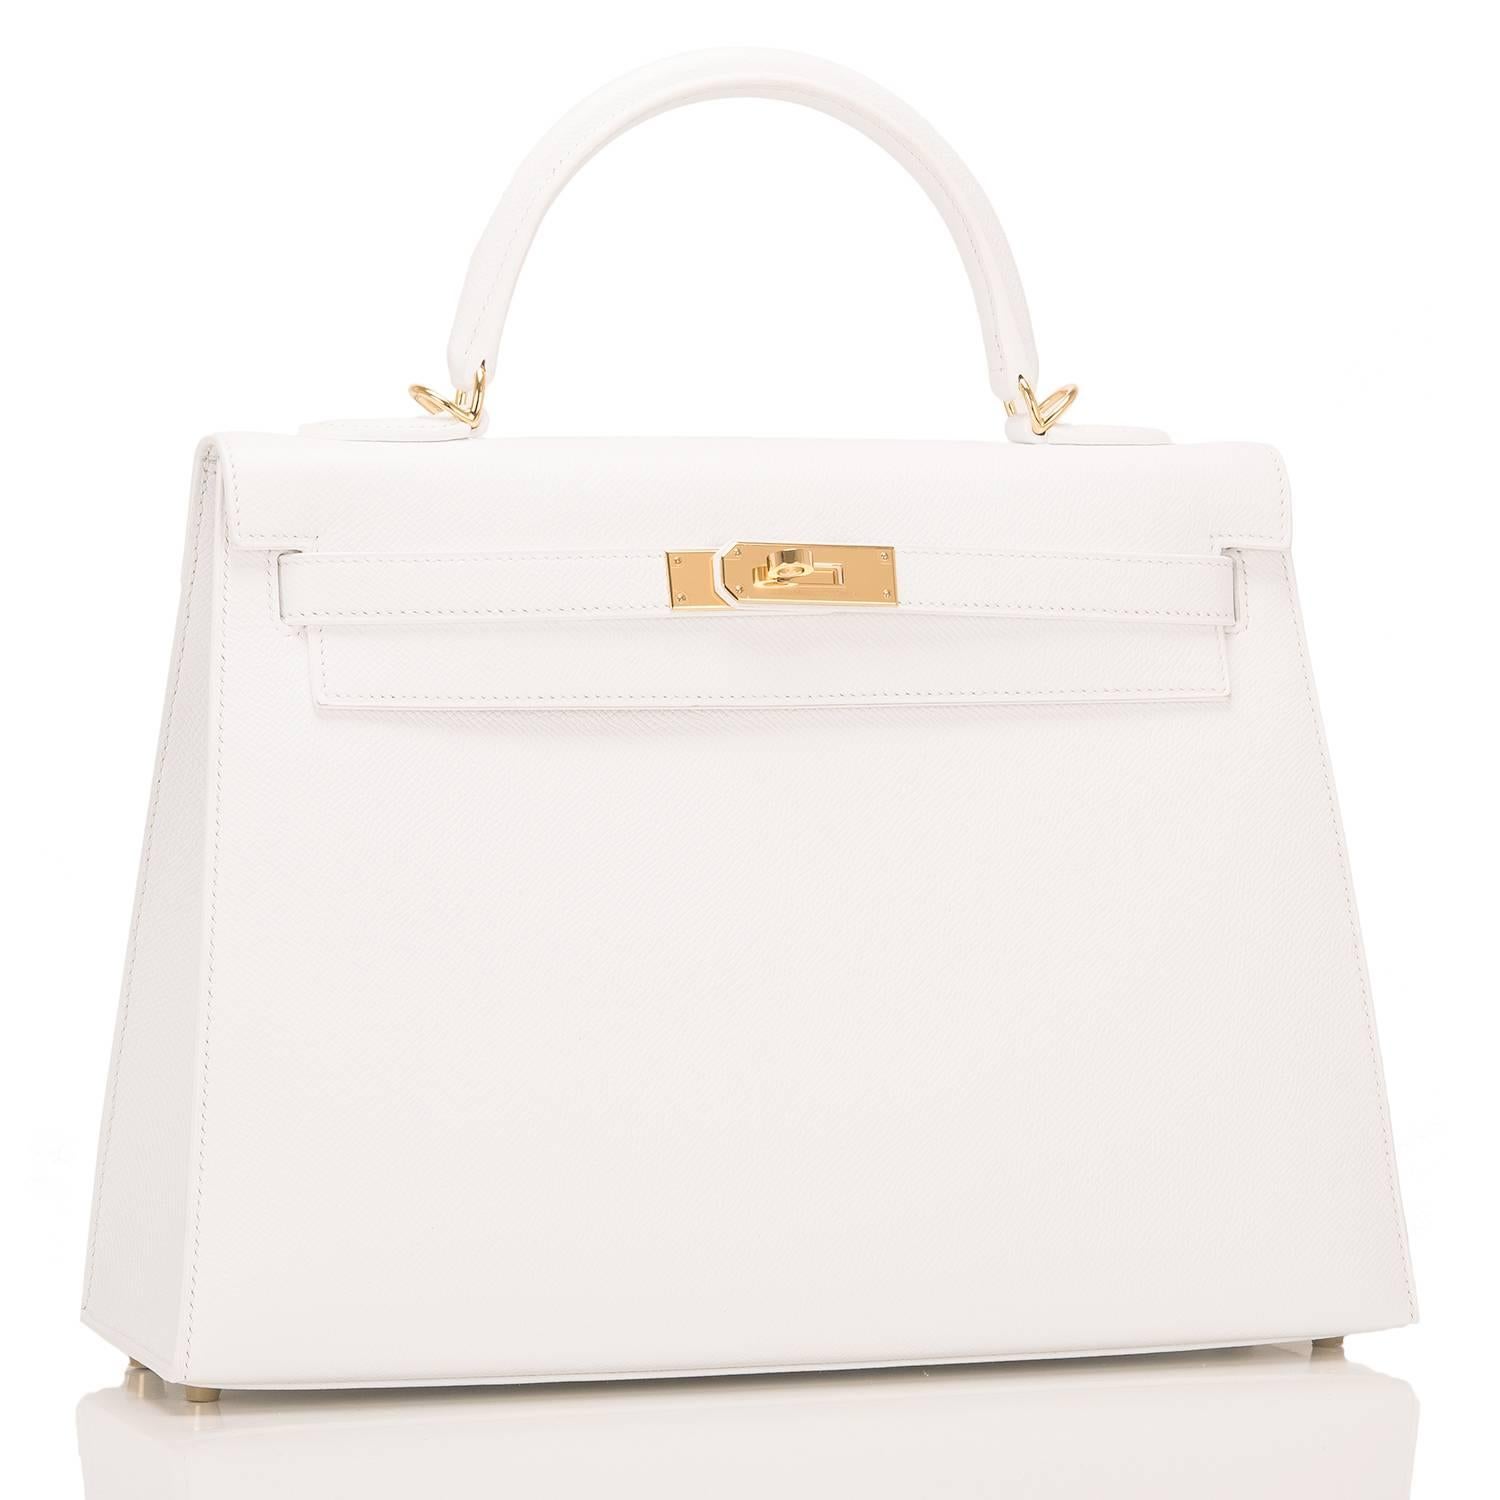  Hermes White Kelly Sellier 32cm of epsom leather with gold hardware.

This Kelly features tonal stitching, a front toggle closure, a clochette with lock and two keys and a single rolled handle.

The interior is lined with white chevre and has